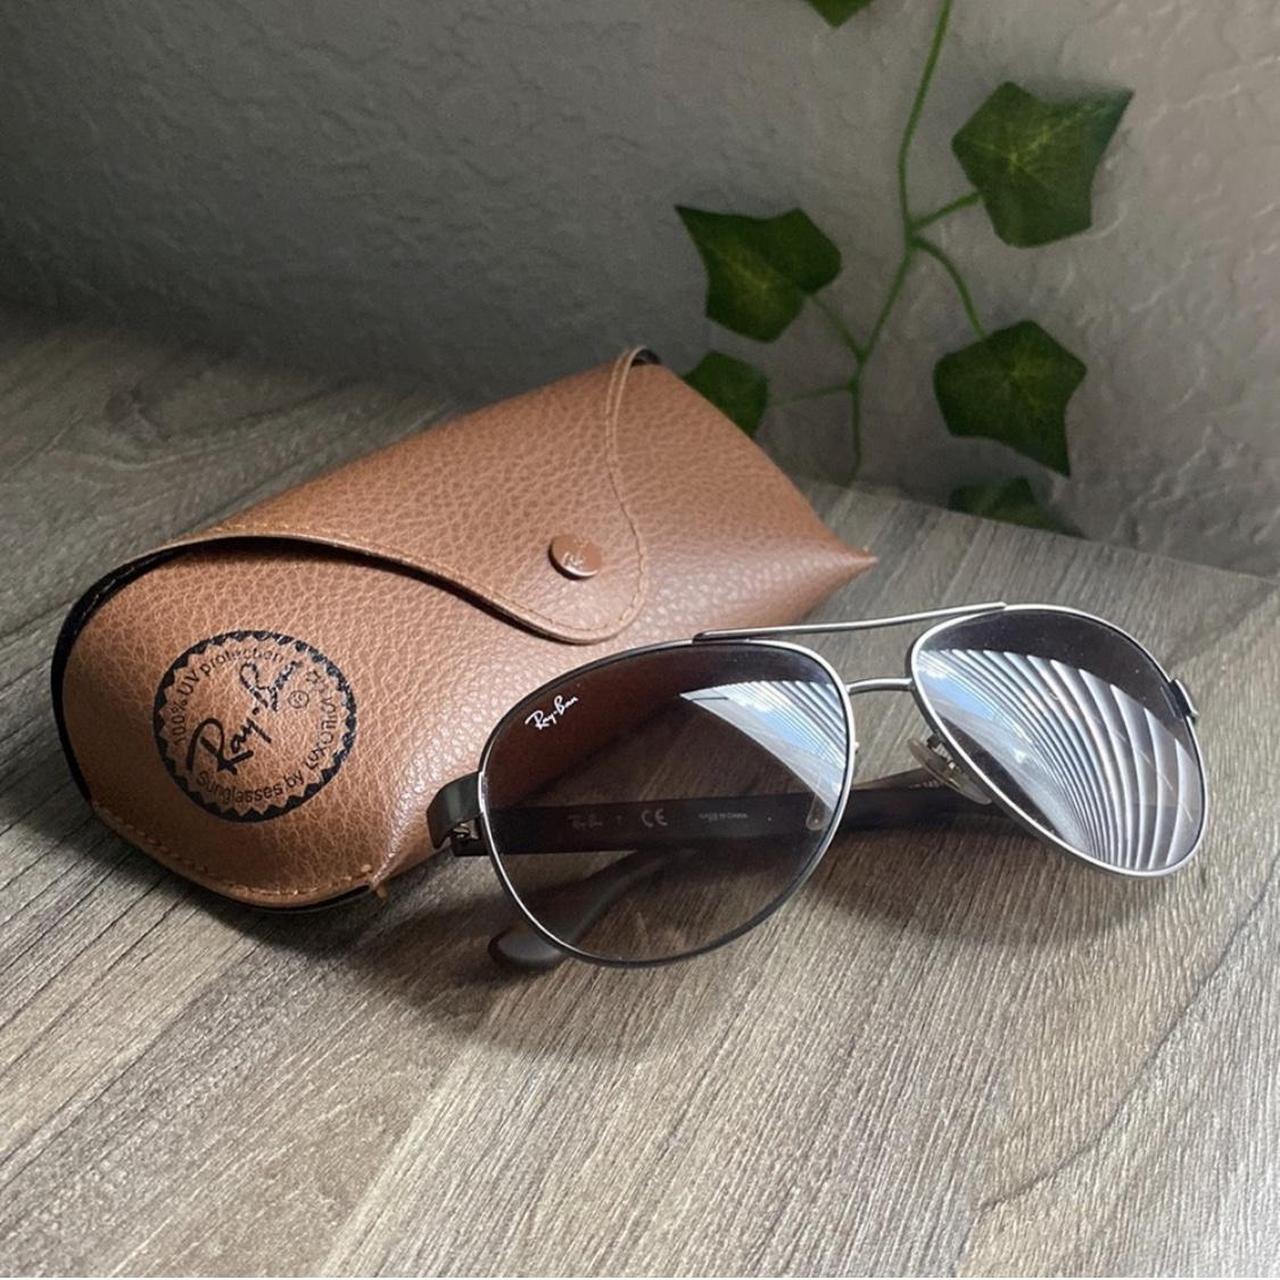 Ray Ban sunglasses with case - Depop